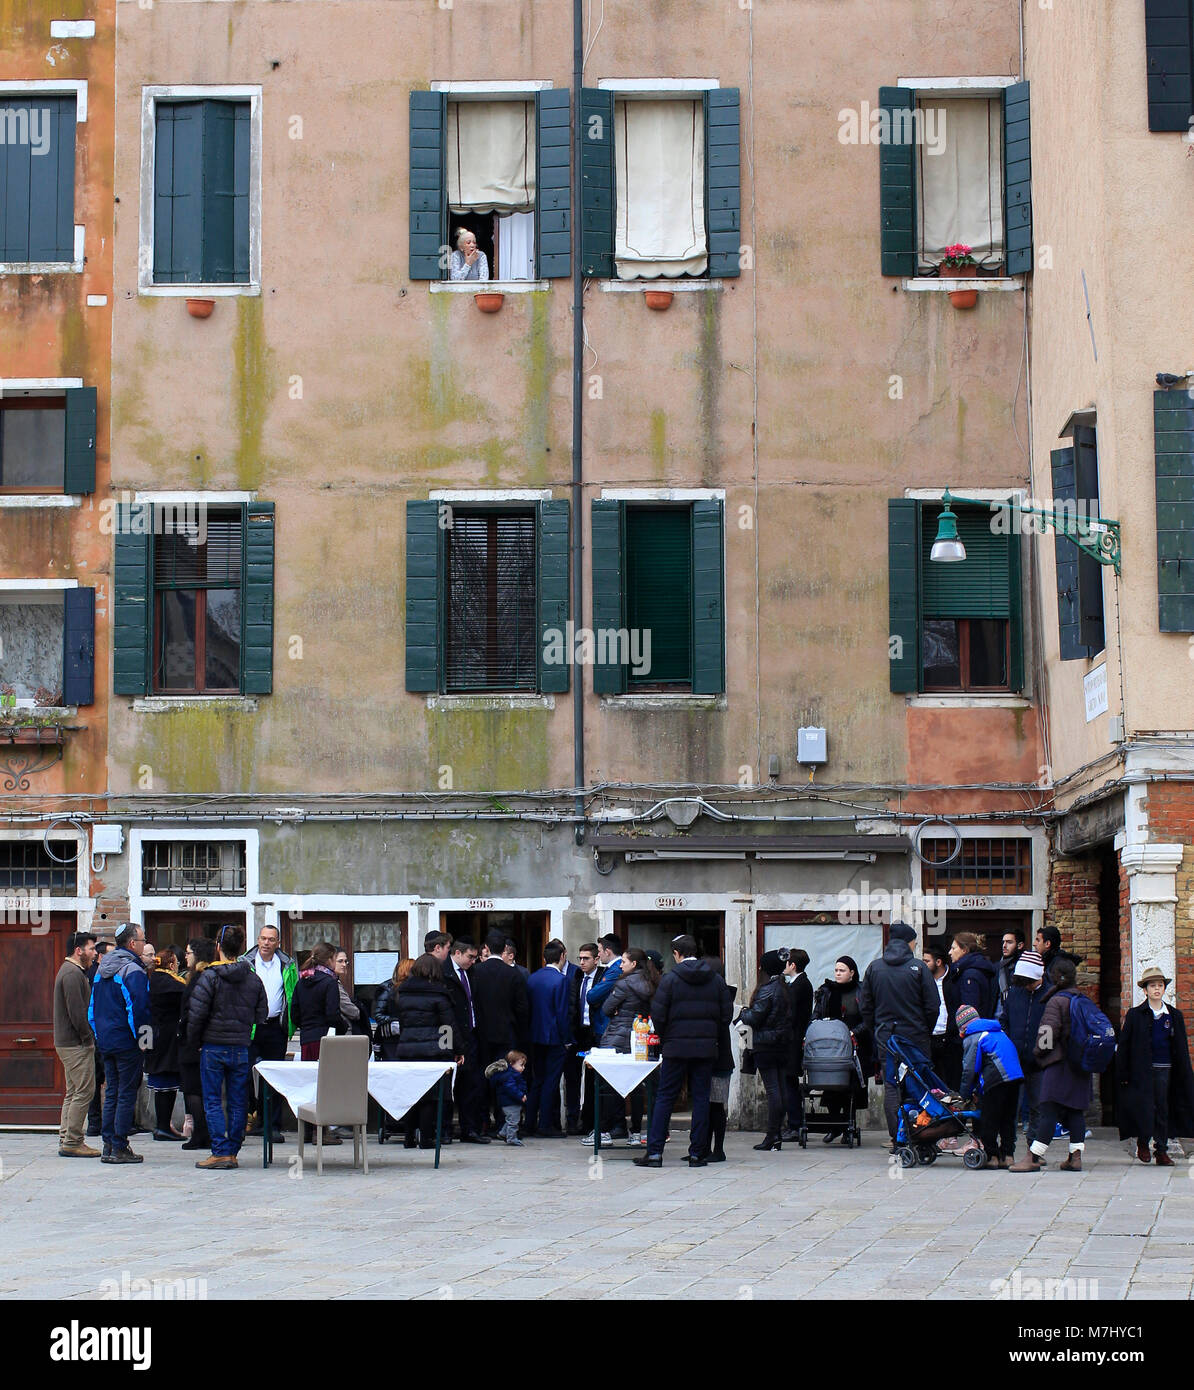 Venice, Italy. 10th, Mar 2018.  Members of Jewish Community in the Campo del Getto Nuovo, during the Shabbat celebrations, day of the Israel community festivities in Venice.The Campo del Ghetto Nuovo is located in Venice in the Cannaregio district. The Campo del Ghetto Nuovo is the true center of the Jewish Ghetto of Venice. This ghetto was the first in the world and took its name from an existing foundry where they melted or 'threw' the metals needed for naval construction in the Arsenal. Hence the name 'jet' and therefore 'ghetto', in which everyone now recognizes a place of segregation.The  Stock Photo